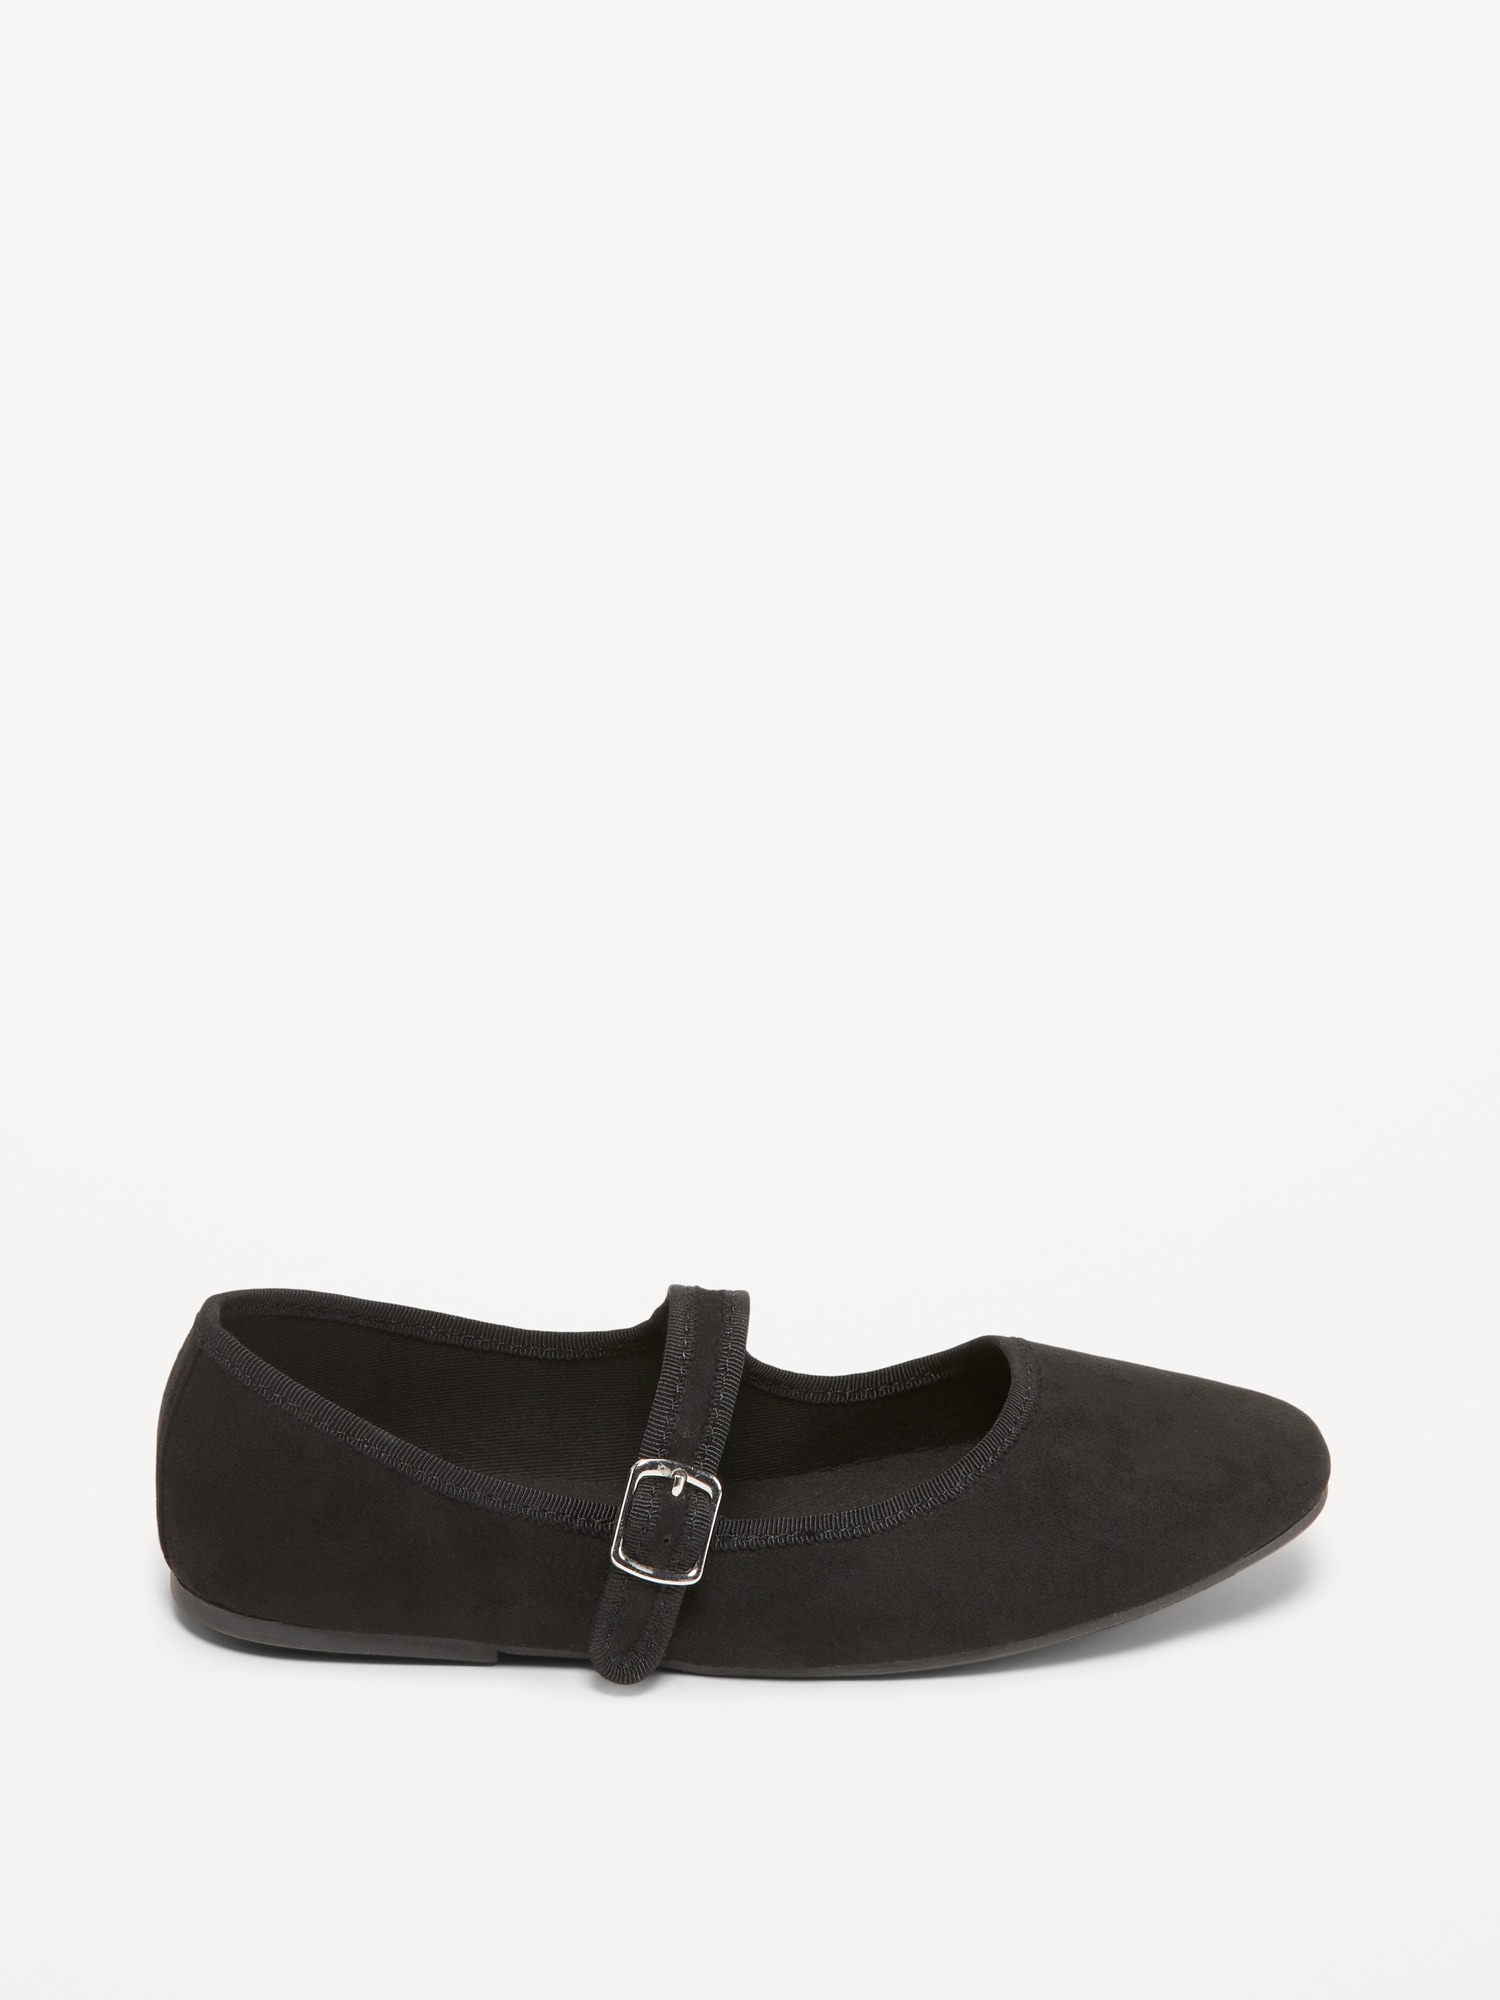 Faux-Suede Ballet Flat Shoes for Girls | Old Navy